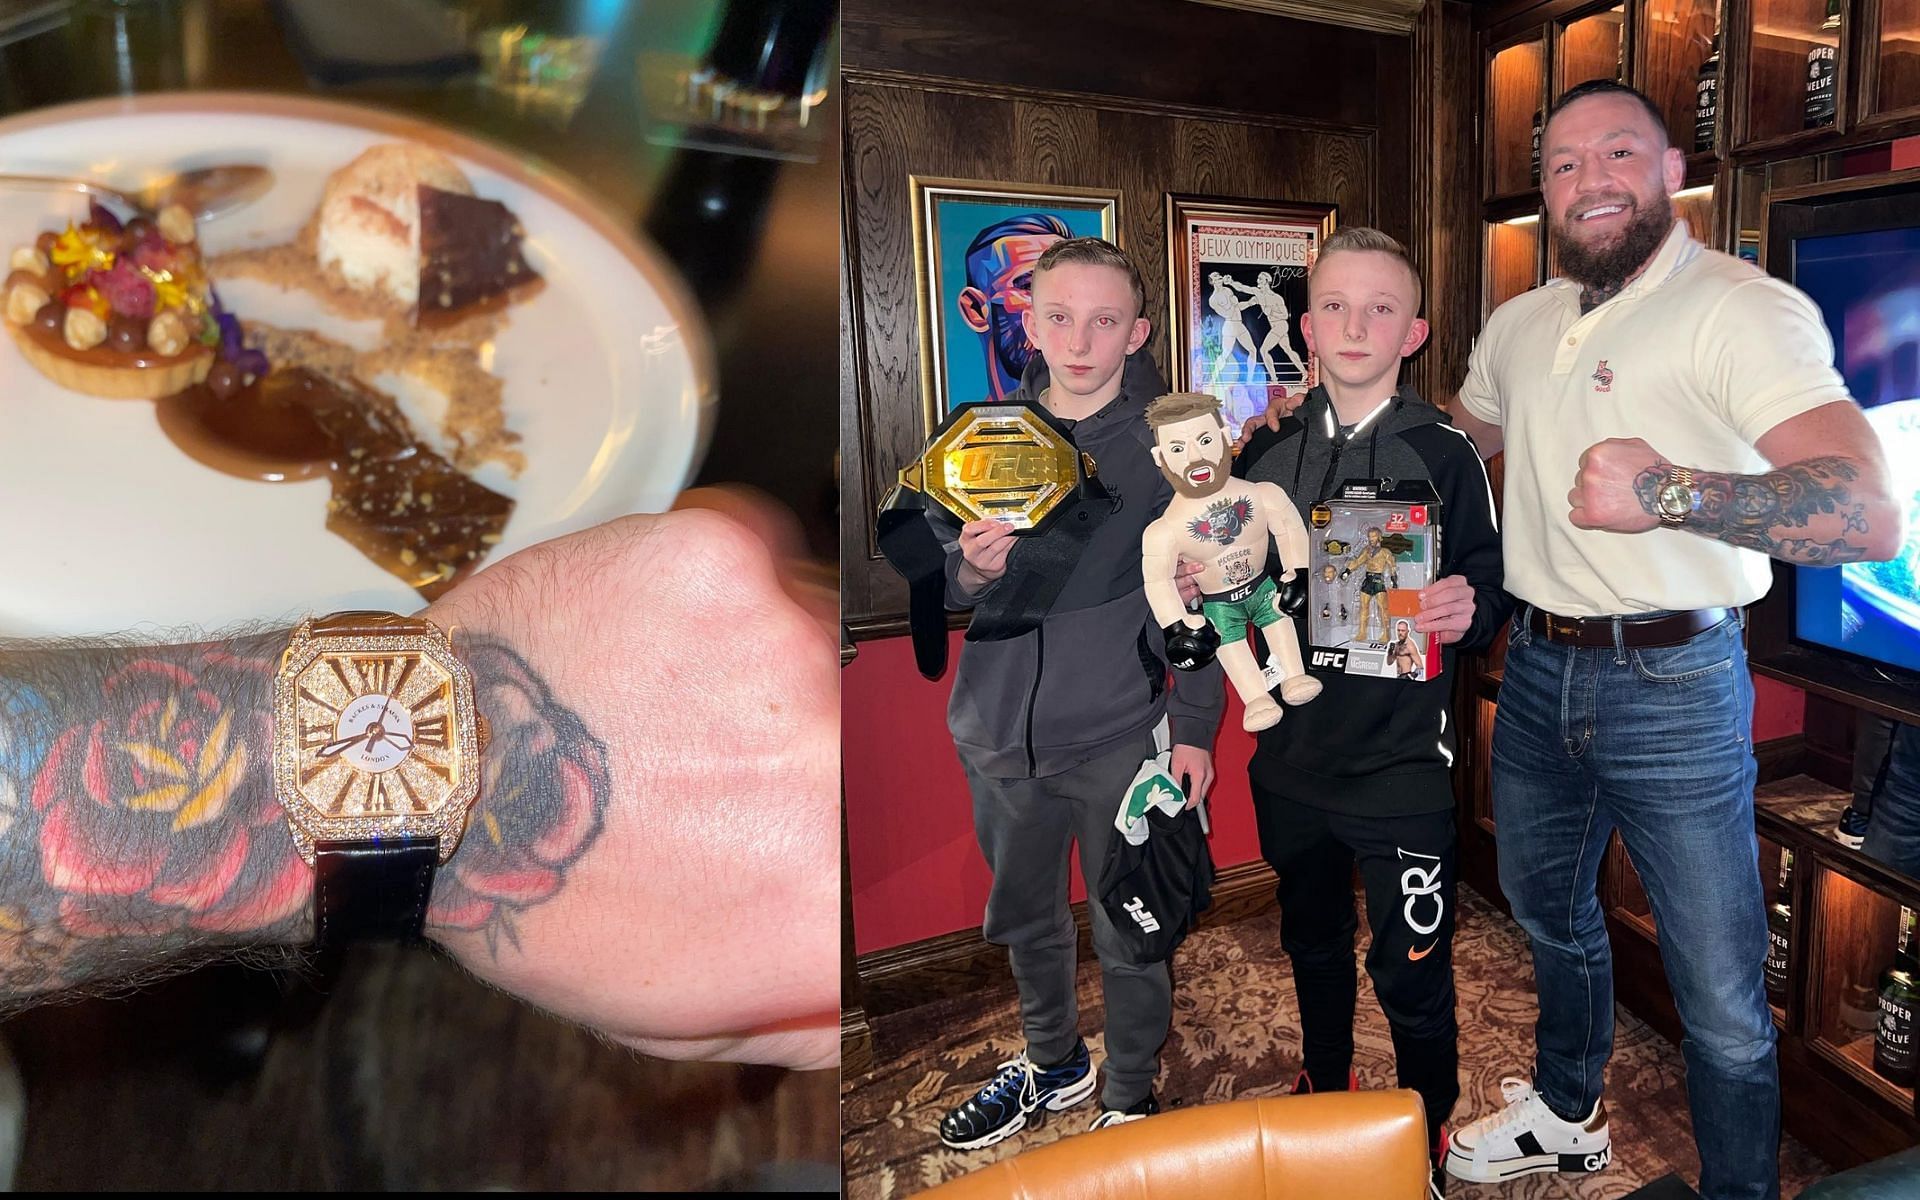 Conor McGregor received a unique gift from one of his Italian supporters. [@thenotoriousmma via Instagram]